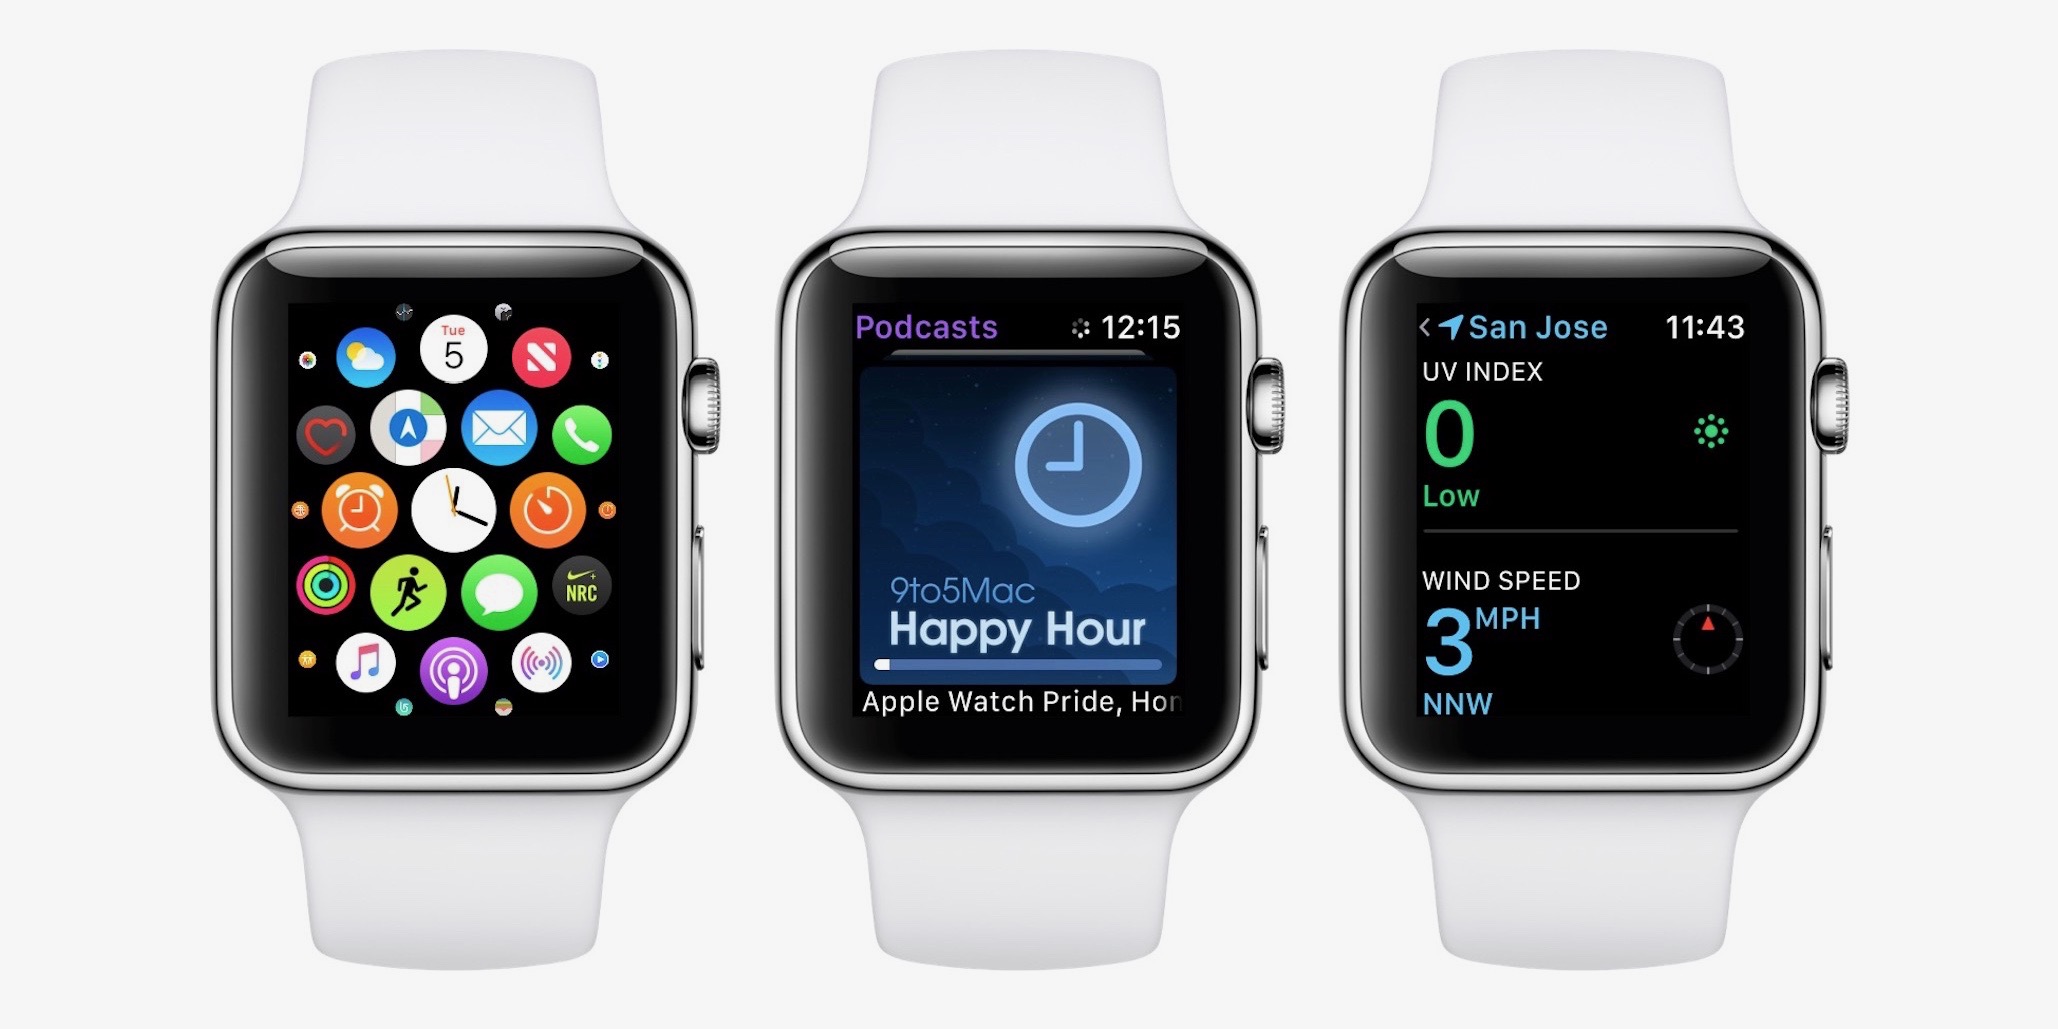 watchOS 5: Features, News, Rumors, and 